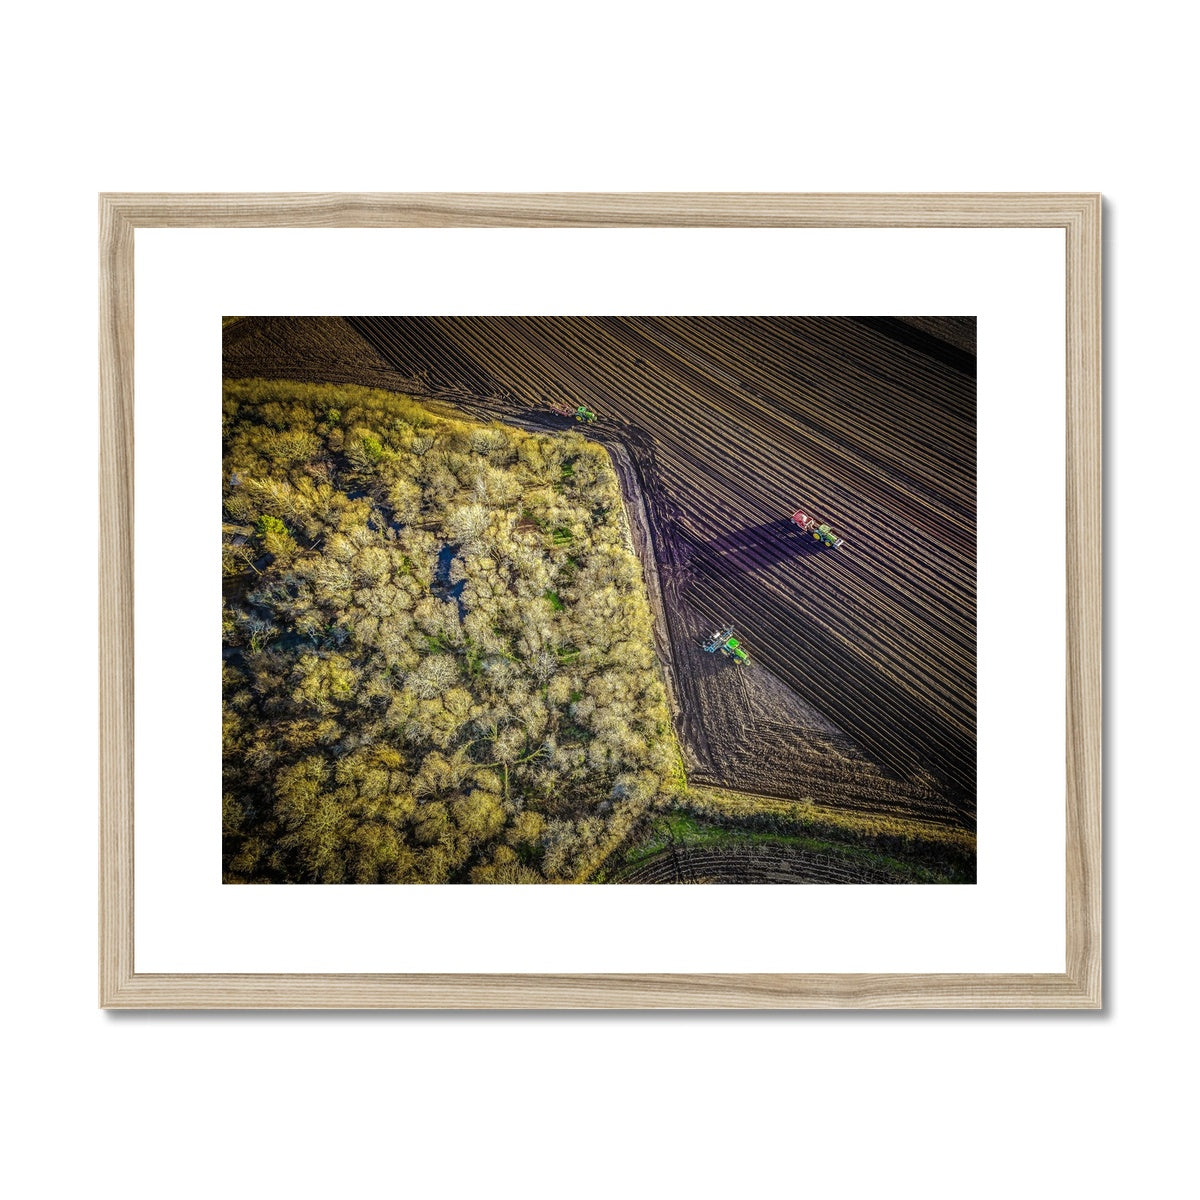 ploughing the fields wooden frame